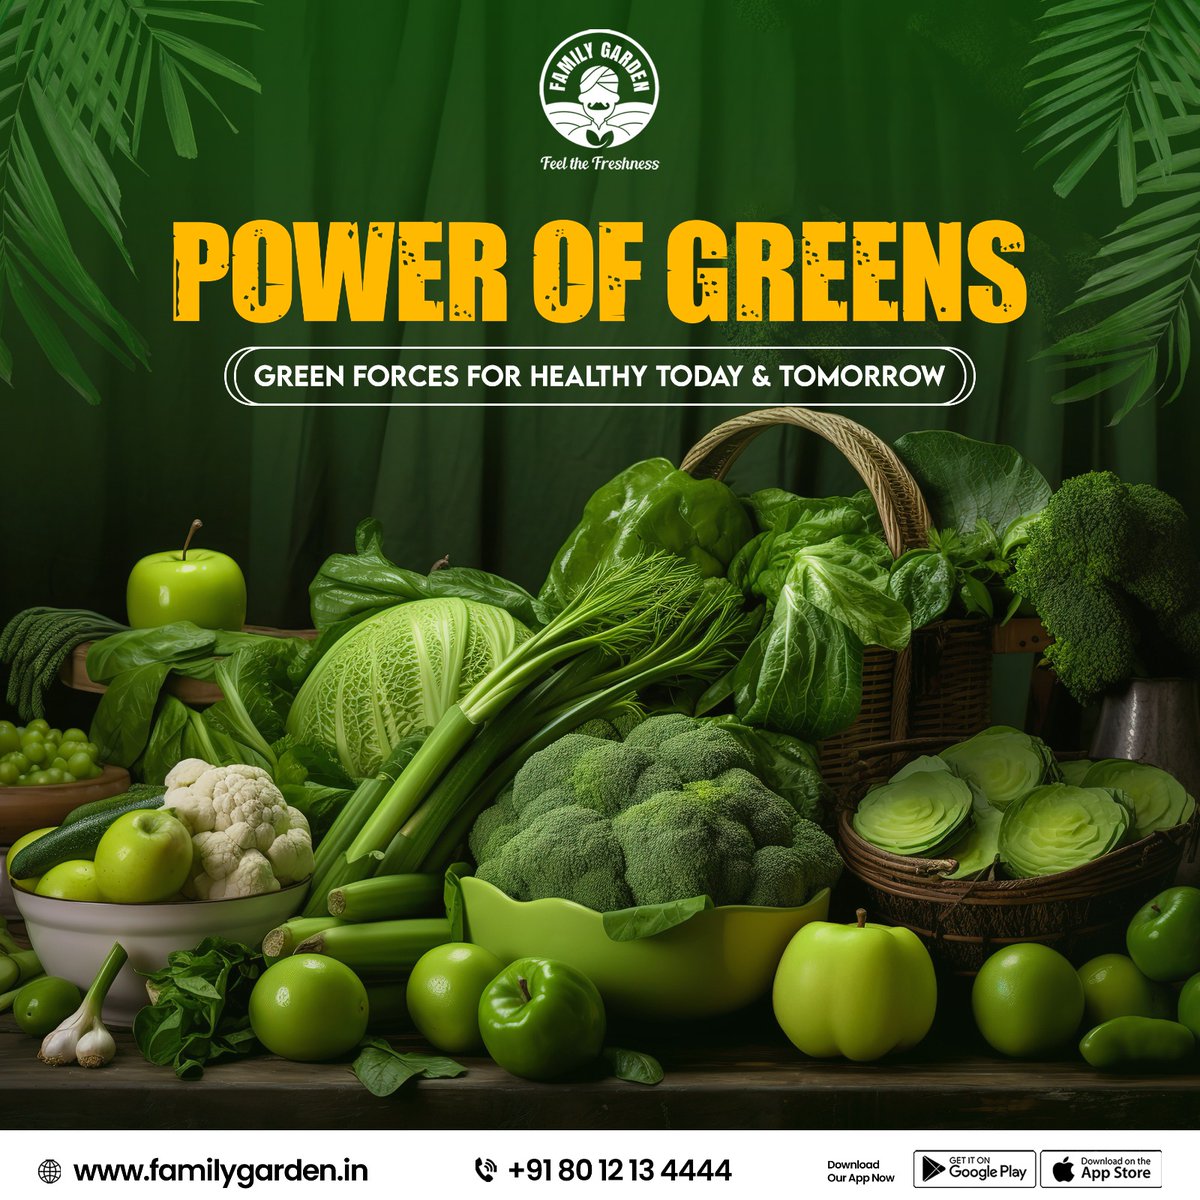 Power of Greens💪 🥗

Green forces for healthy today & tomorrow  💚🍈🍃🥒🫑

#PowerOfGreens #HealthyLiving #GreenEating #NutritionMatters #EatYourGreens #HealthyHabits #WellnessJourney #GreensForLife #VibrantHealth #balanceddieting